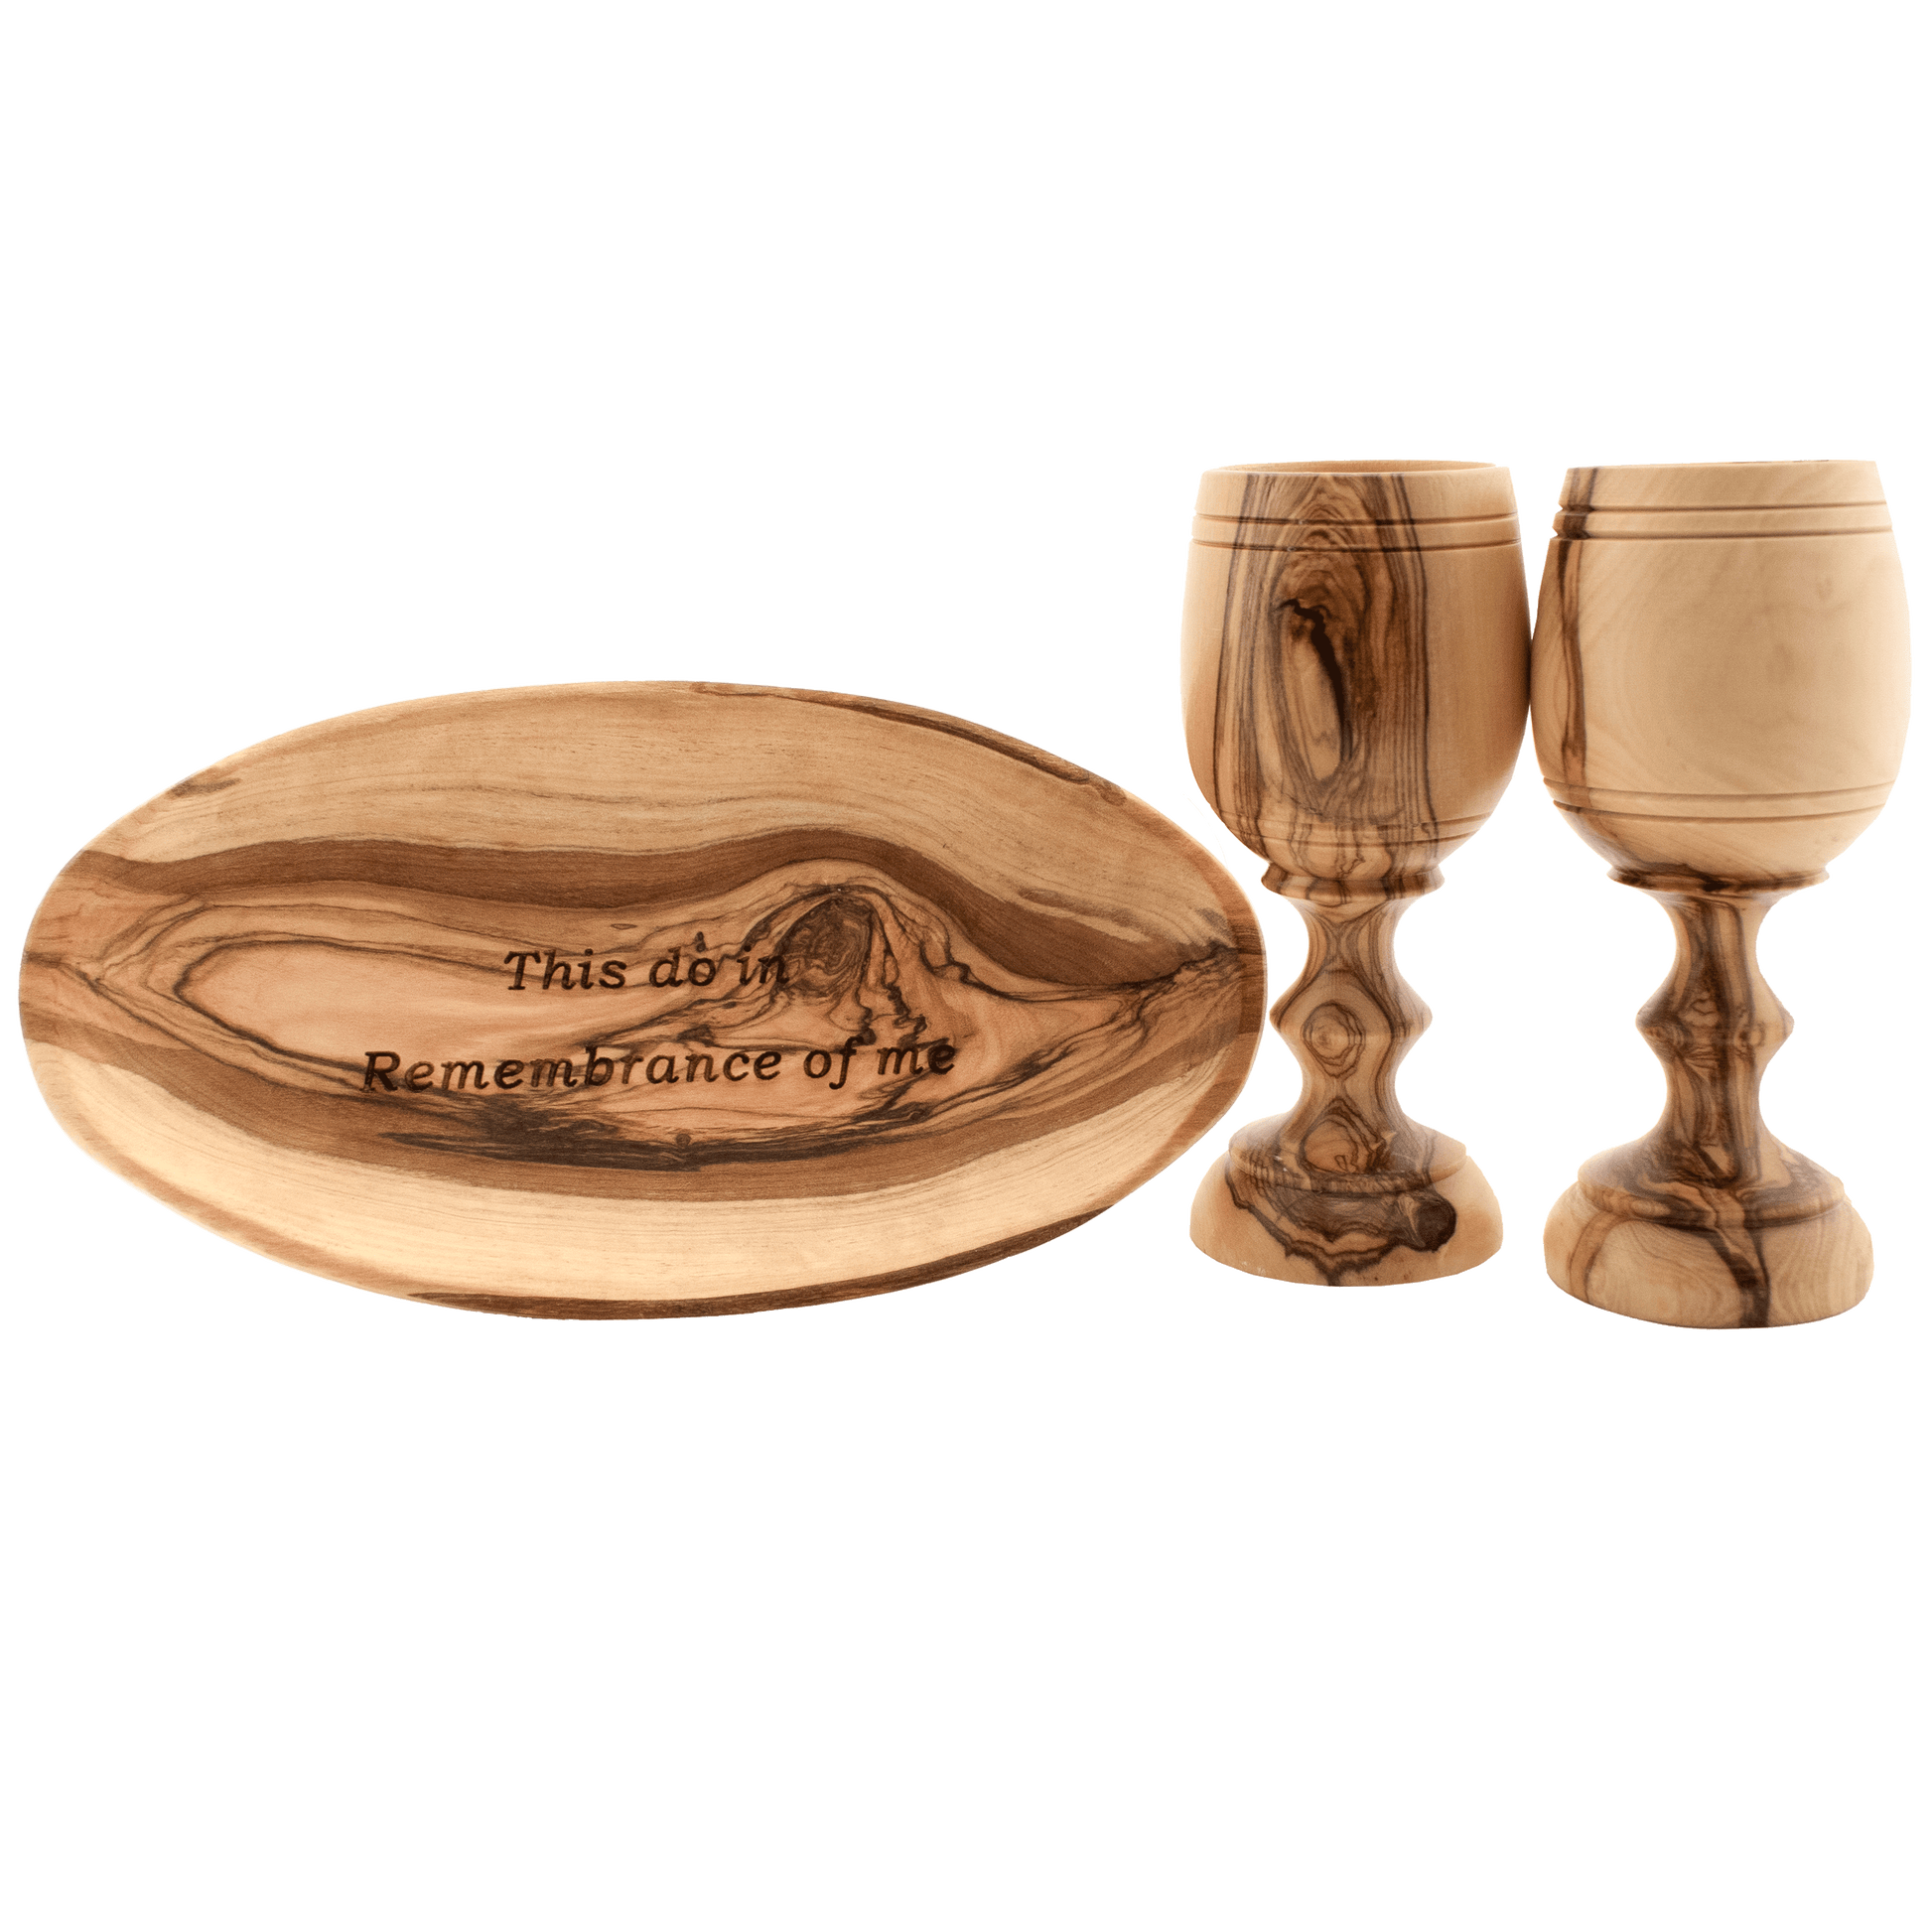 This-Do-in-Remembrance-of-Me-Communion-Set